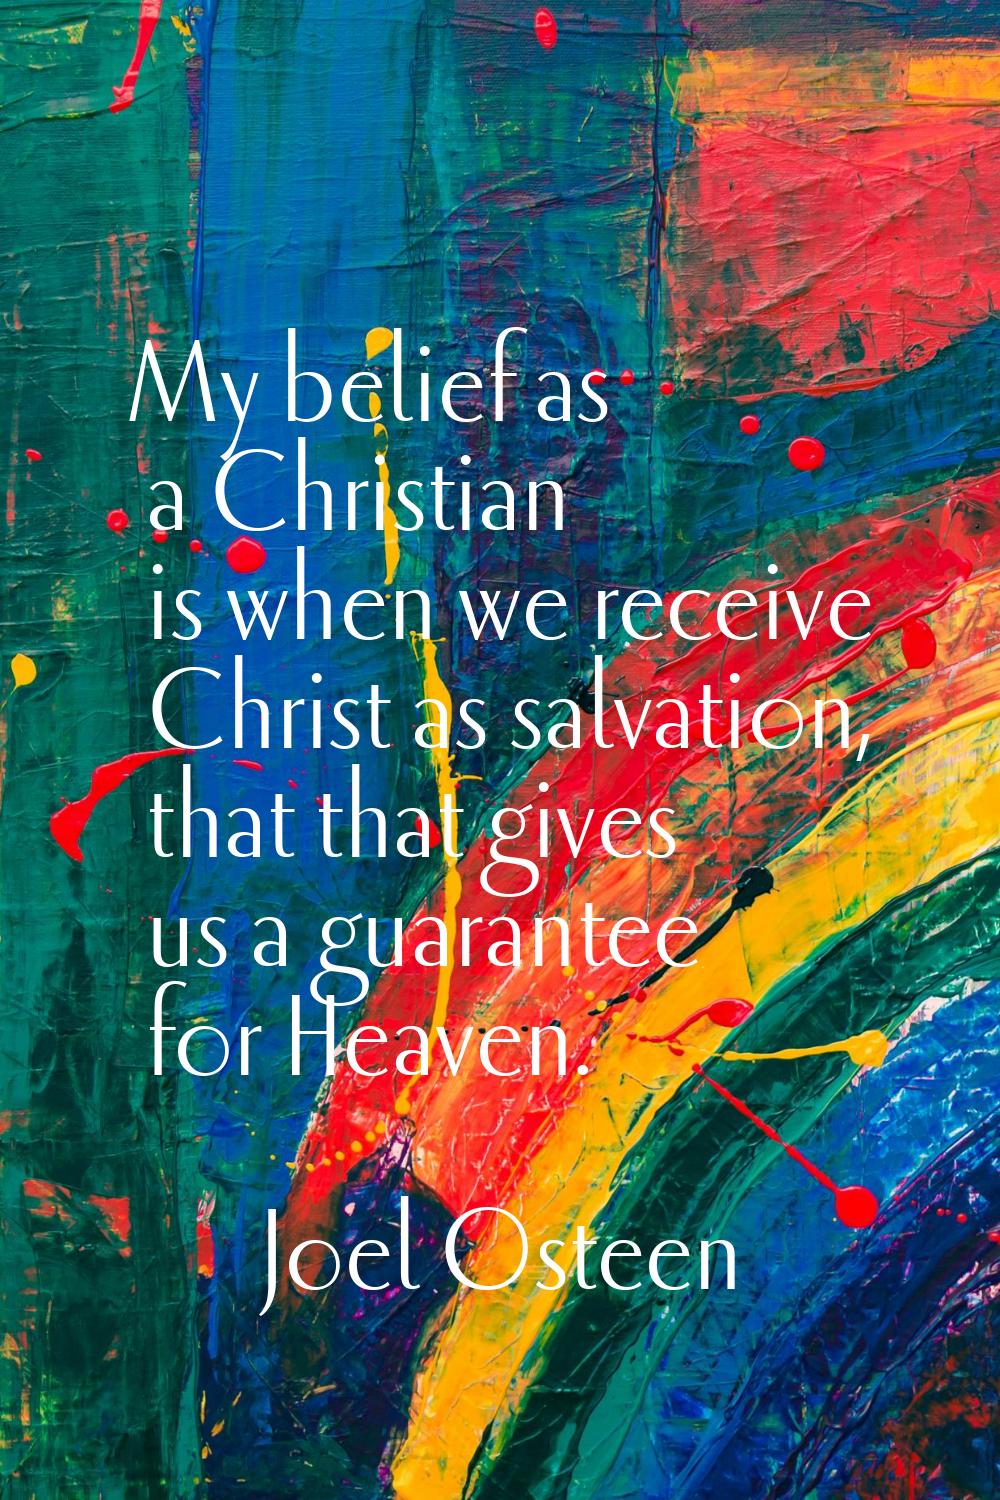 My belief as a Christian is when we receive Christ as salvation, that that gives us a guarantee for